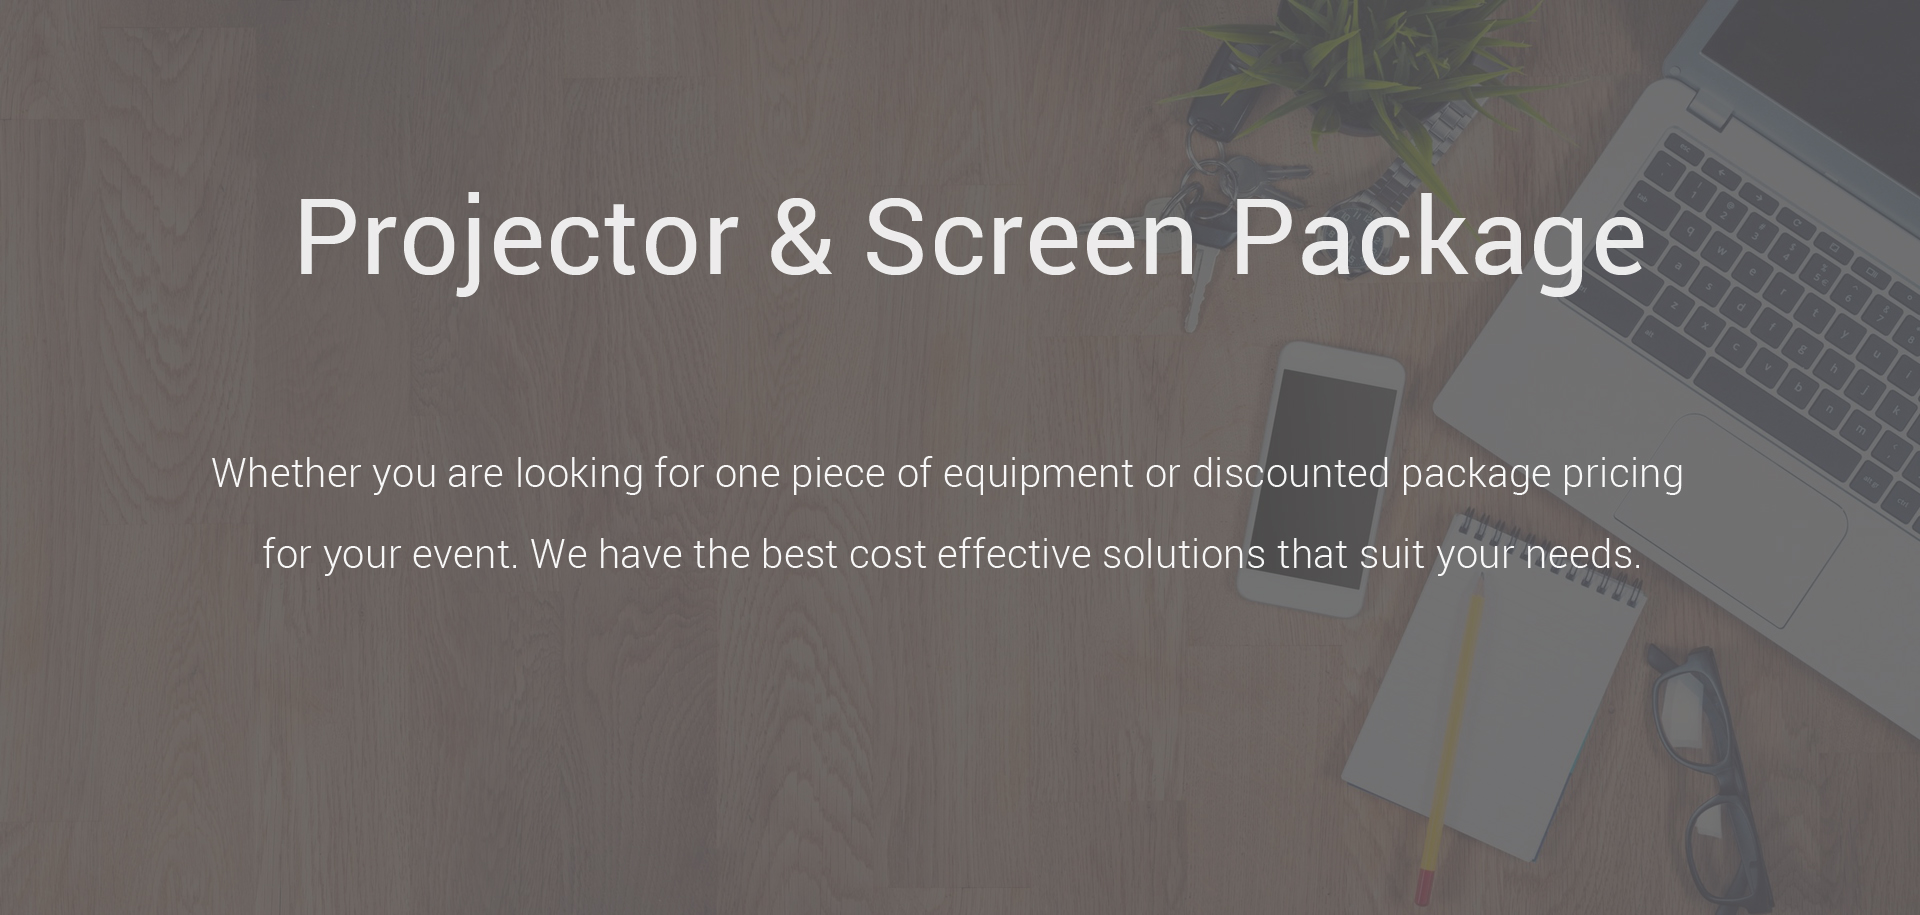 Boston Projector Rentals - Projector & Screen Package | All-in-One Deliver and Setup Edit